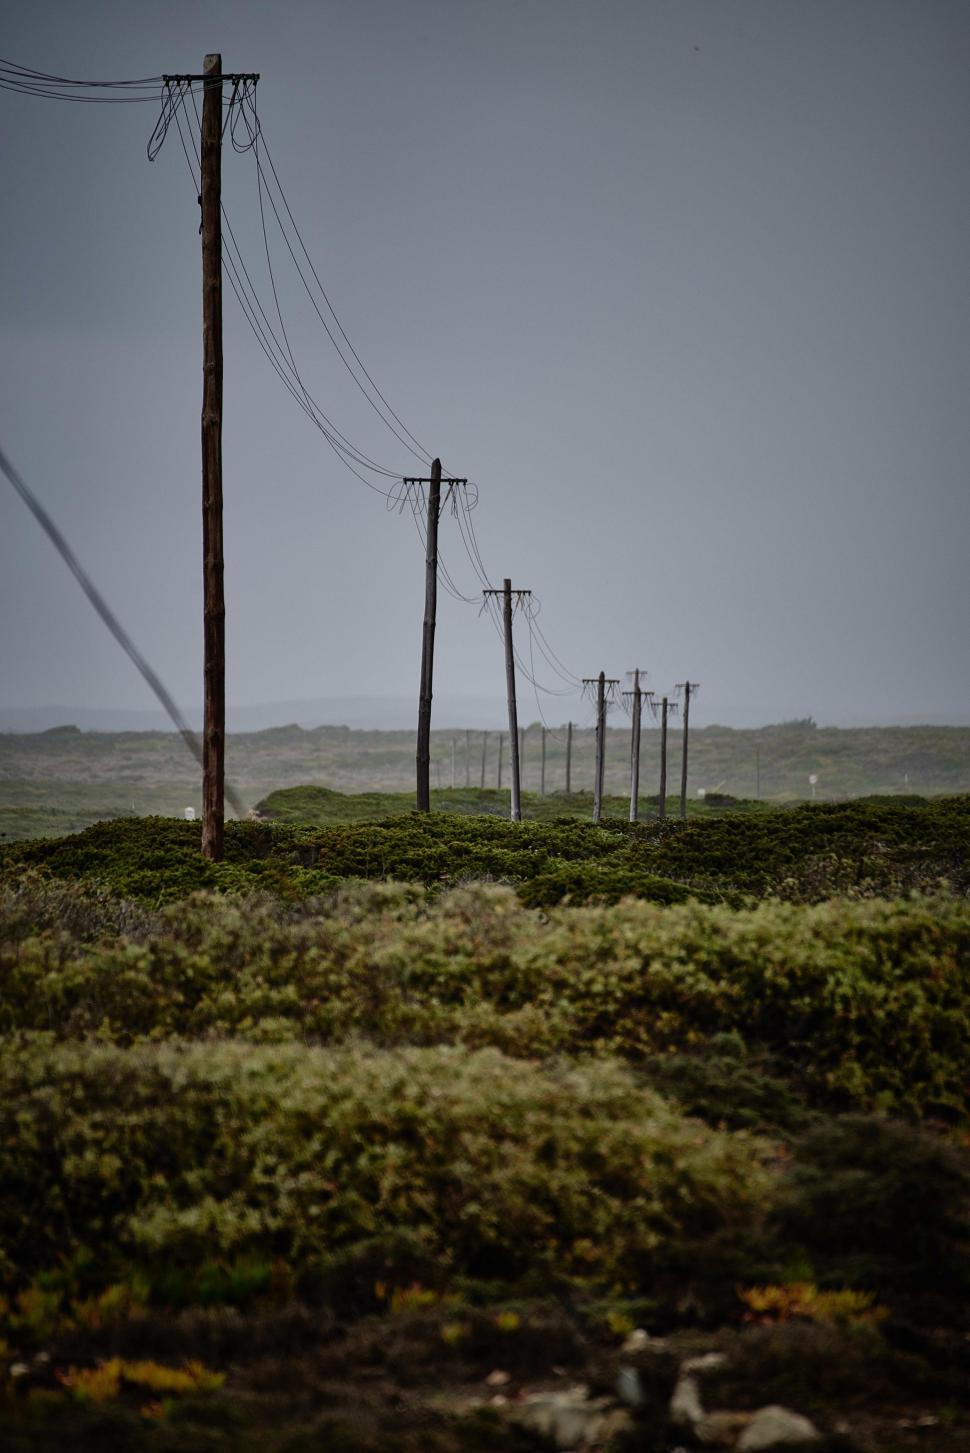 Free Image of Grassy Field With Power Lines and Telephone Poles 